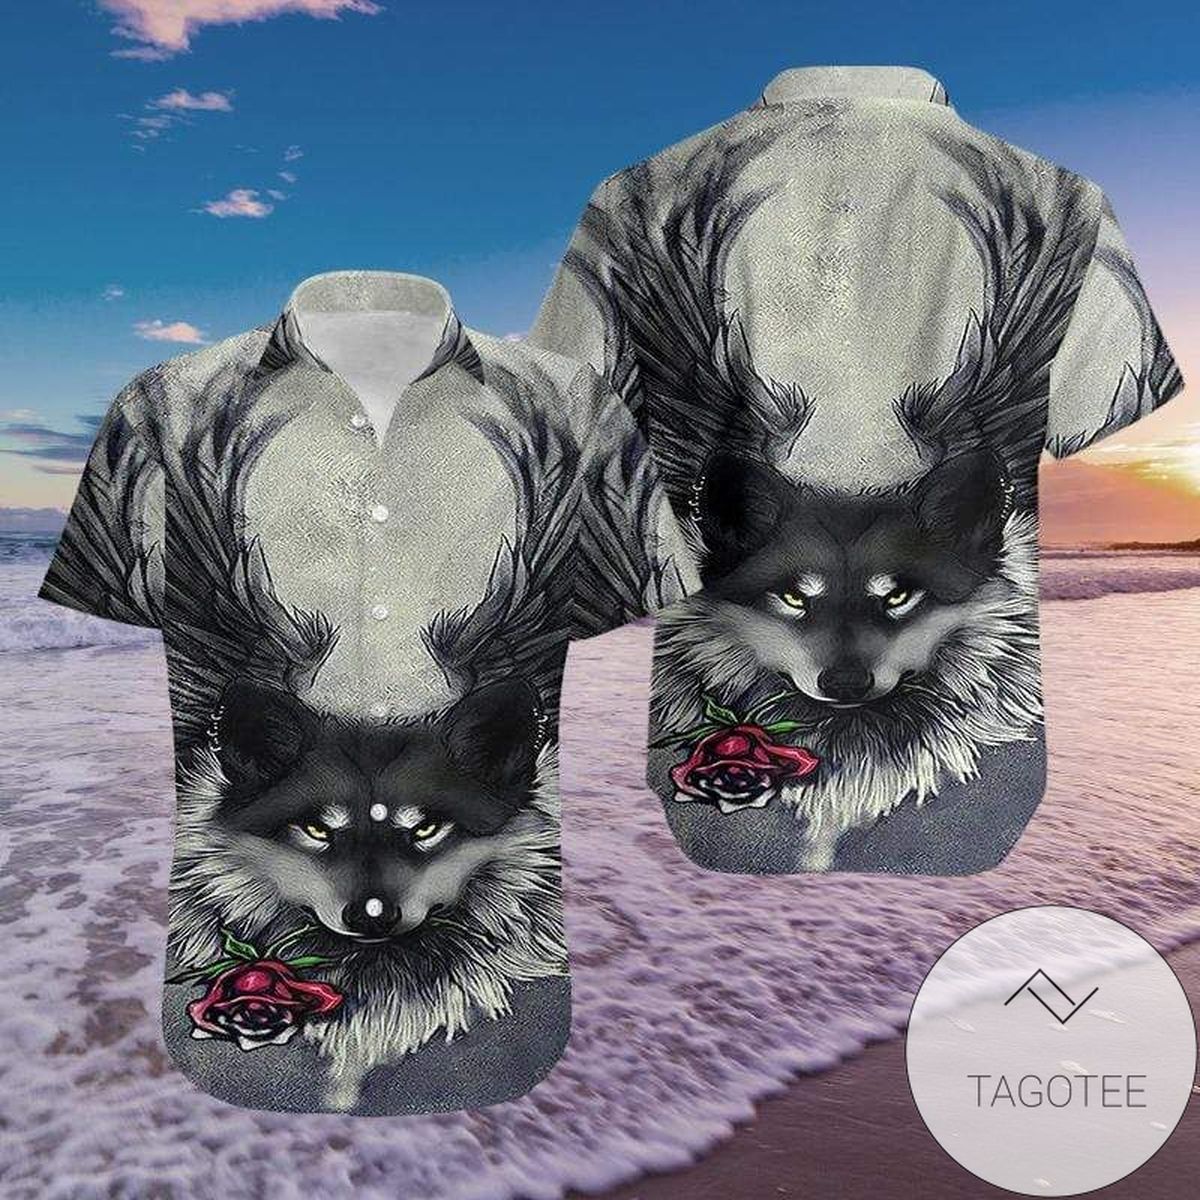 Shop From 1000 Unique Hawaiian Aloha Shirts Wolf And Rose